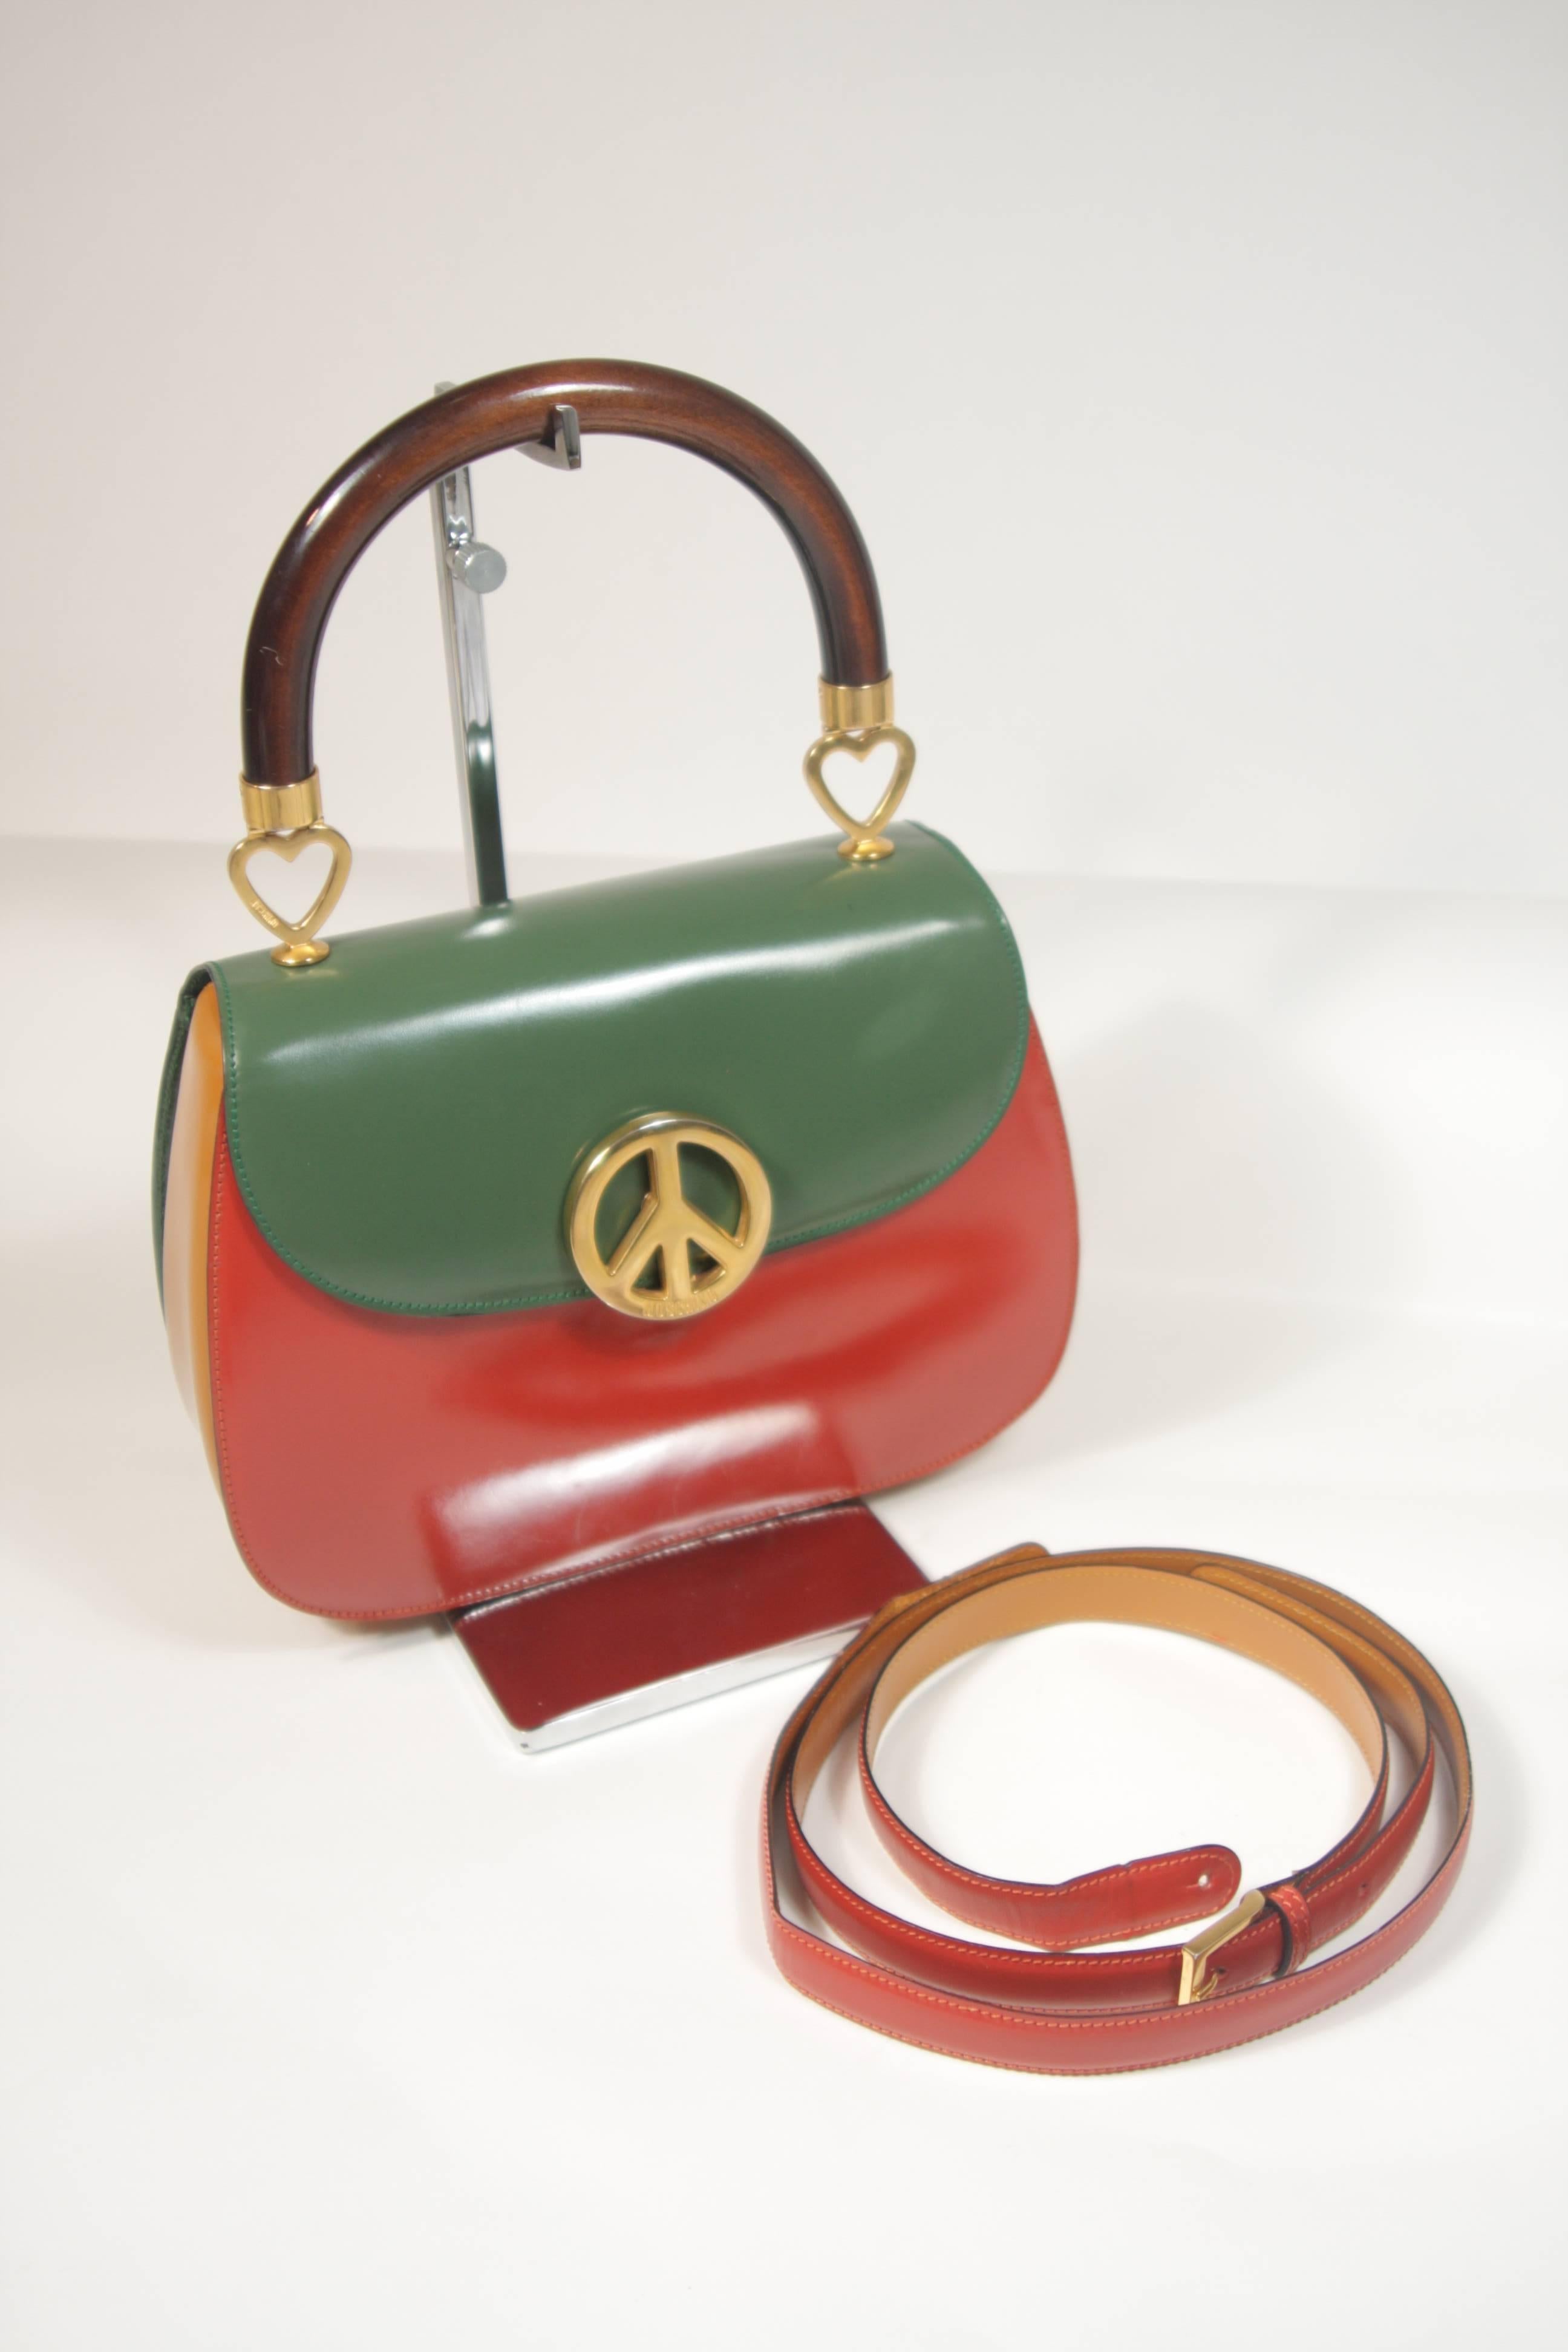 MOSCHINO Peace & Love Color Block Leather Purse with Wood Handle Optional Strap 1